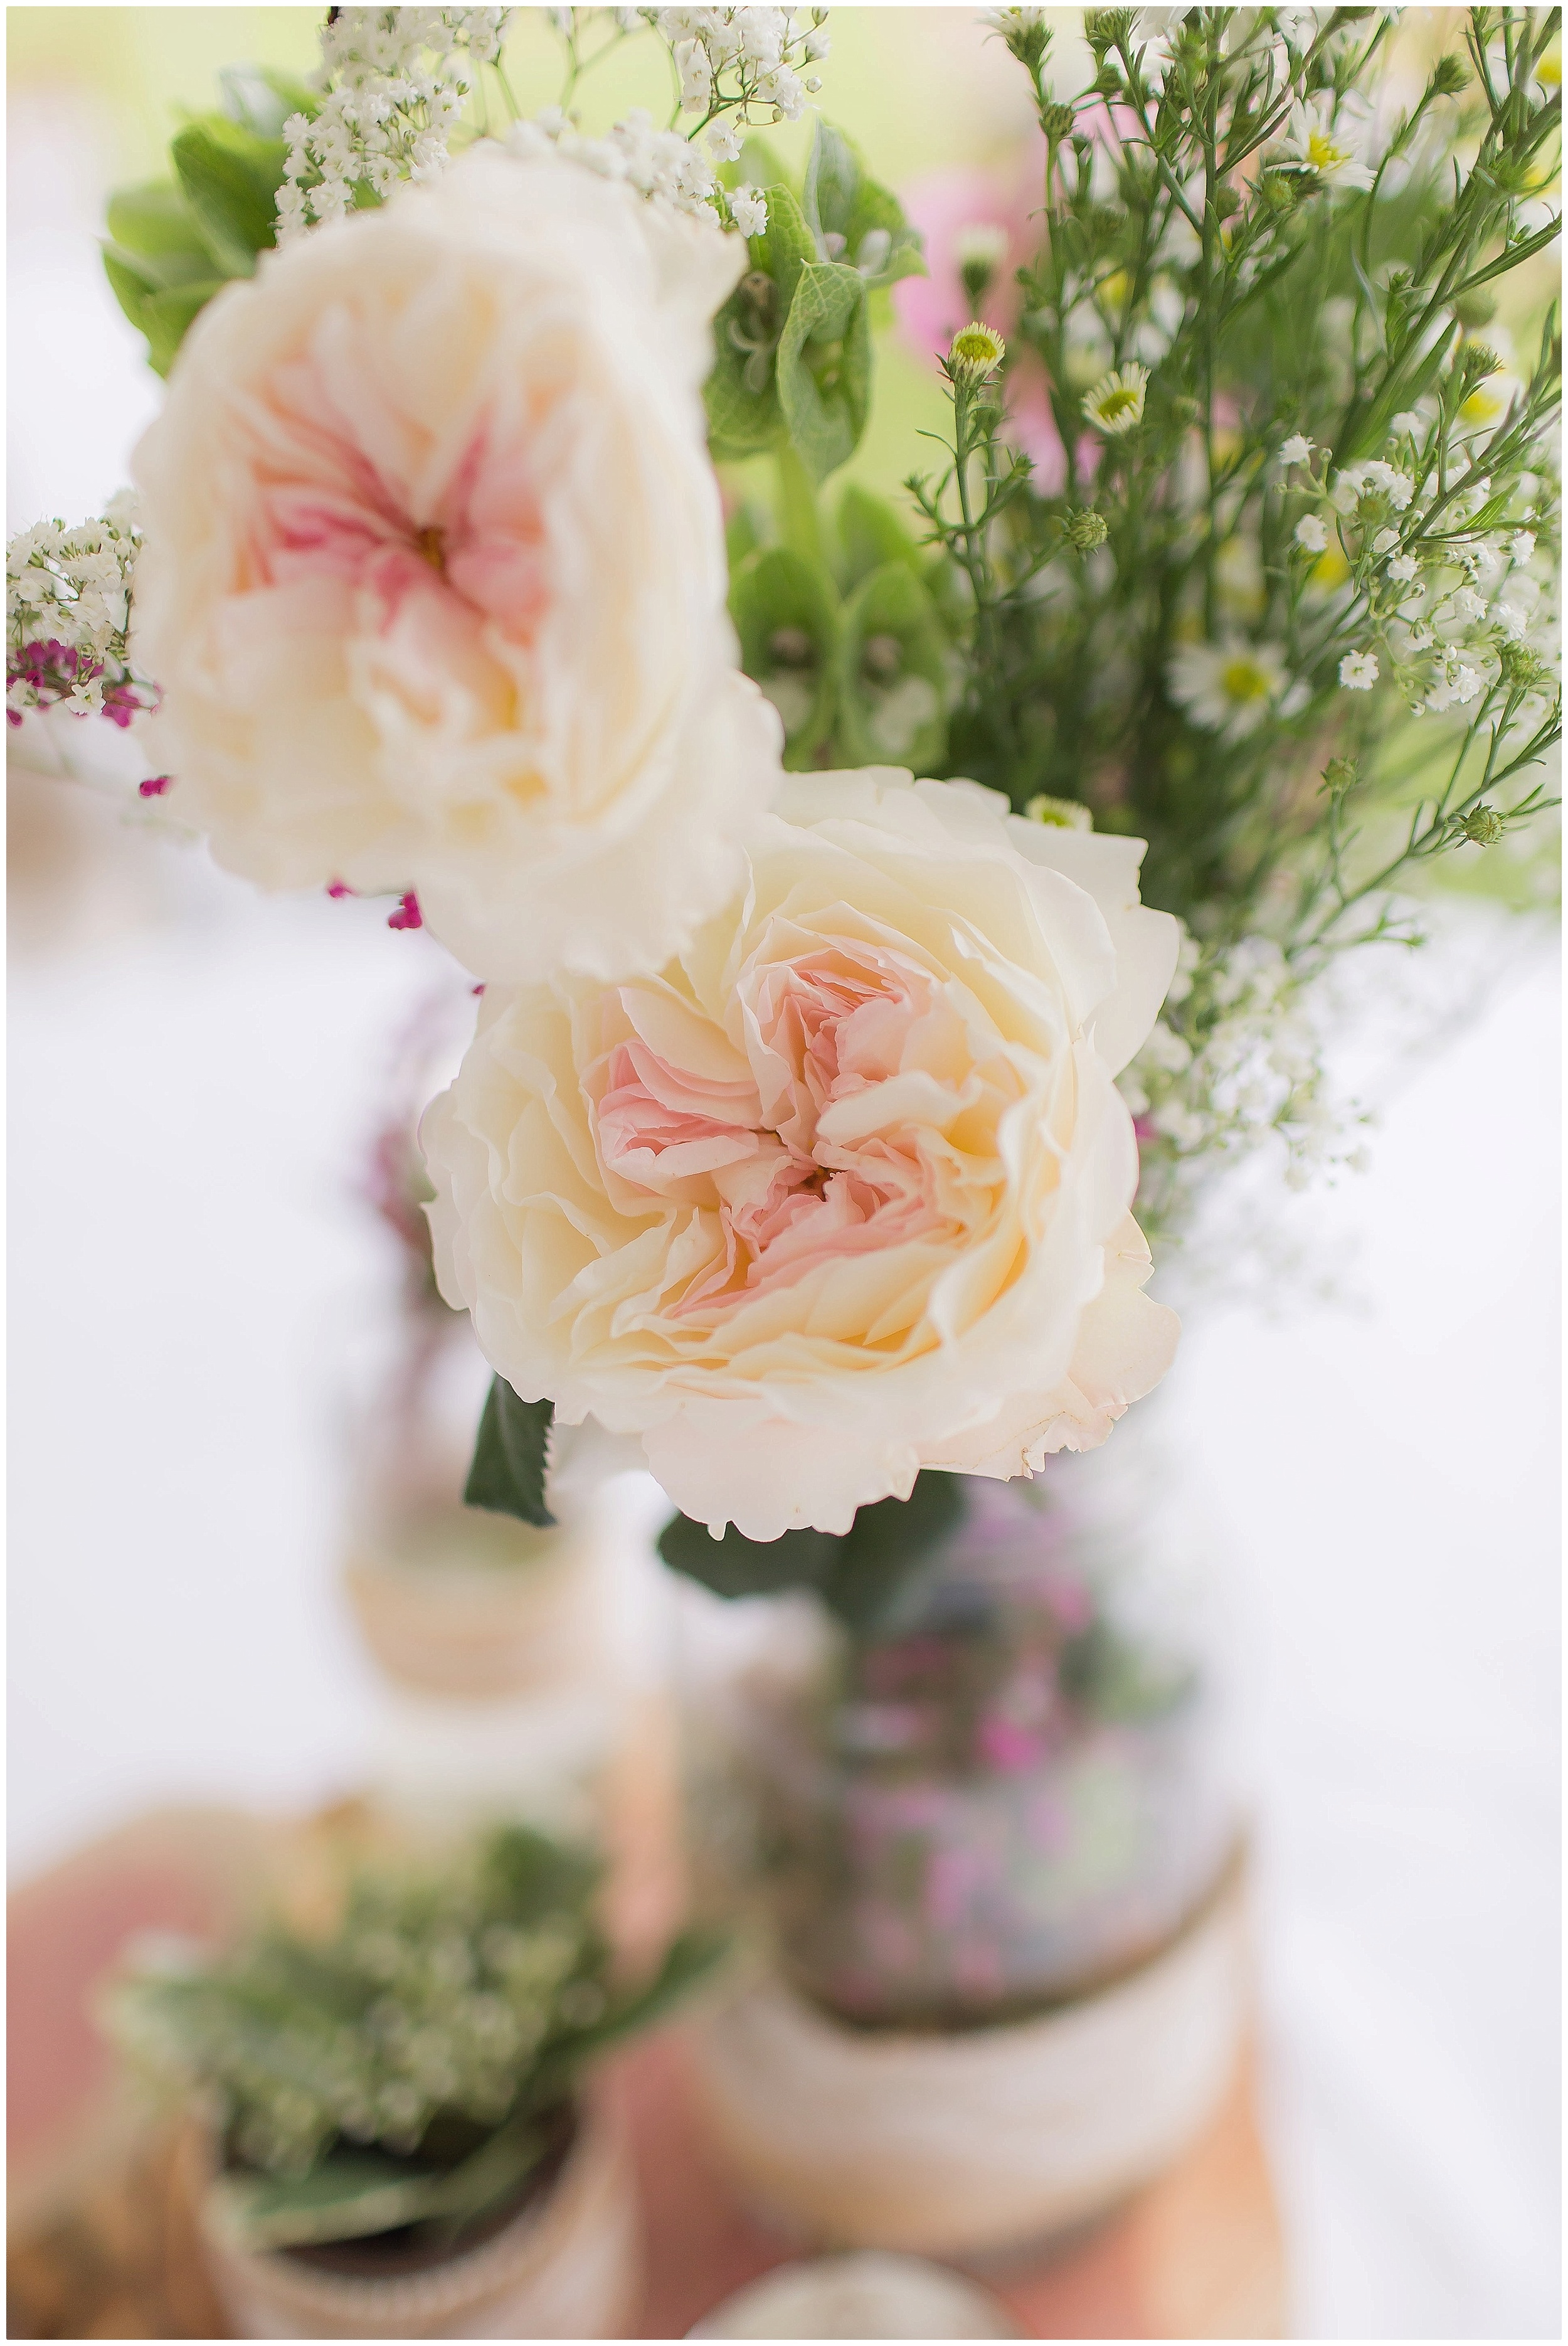 Centerpieces with David Austin Roses and Lace Accents. 